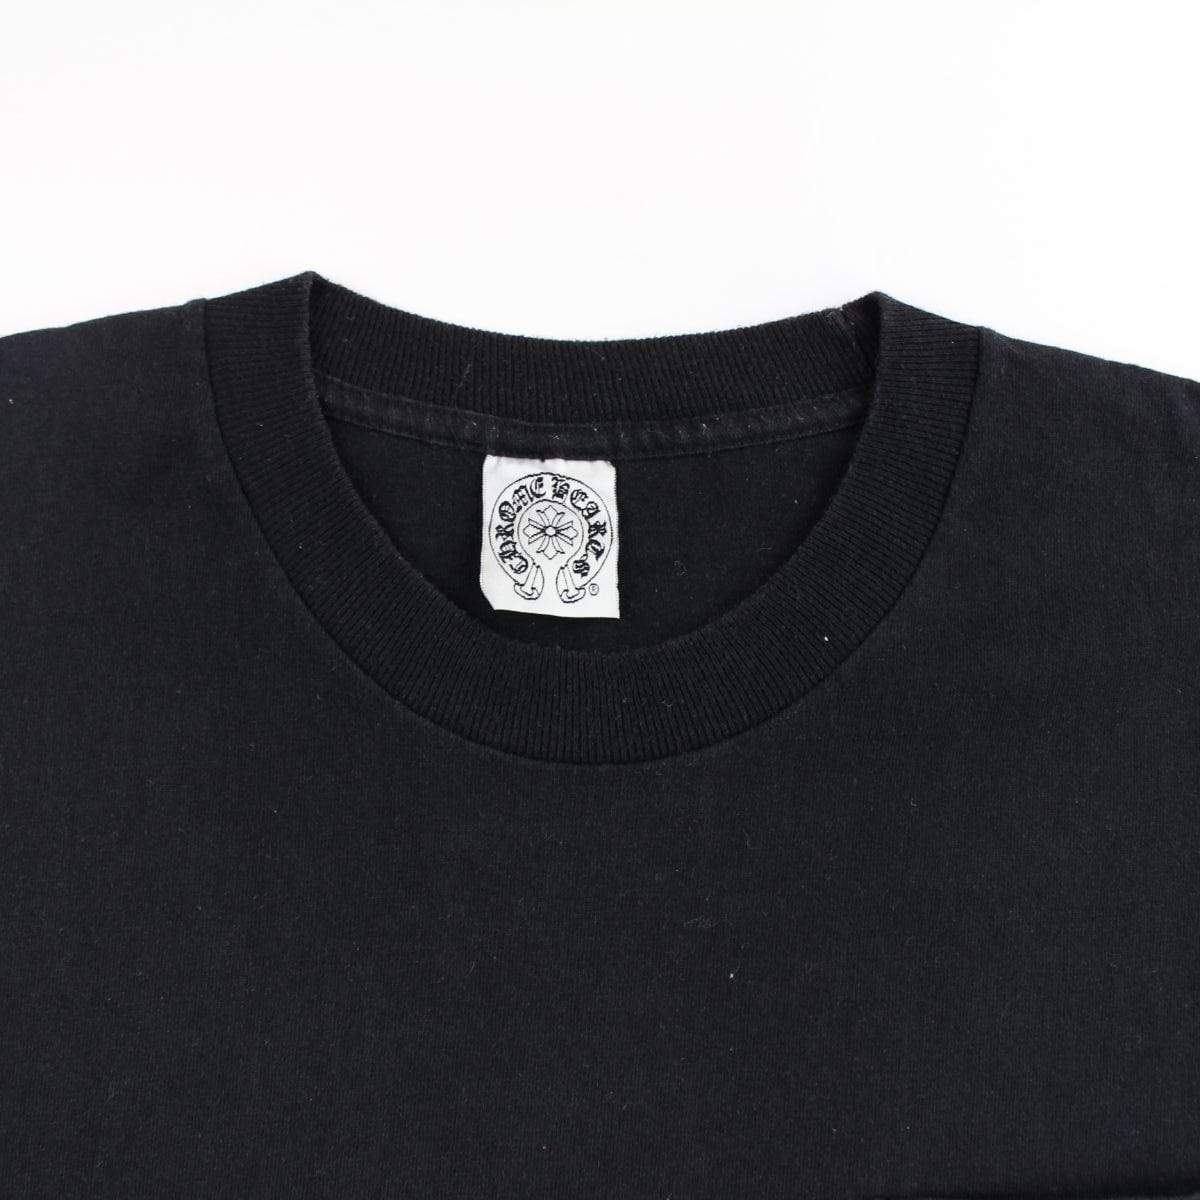 chrome hearts blue text crosses tee black - SaruGeneral